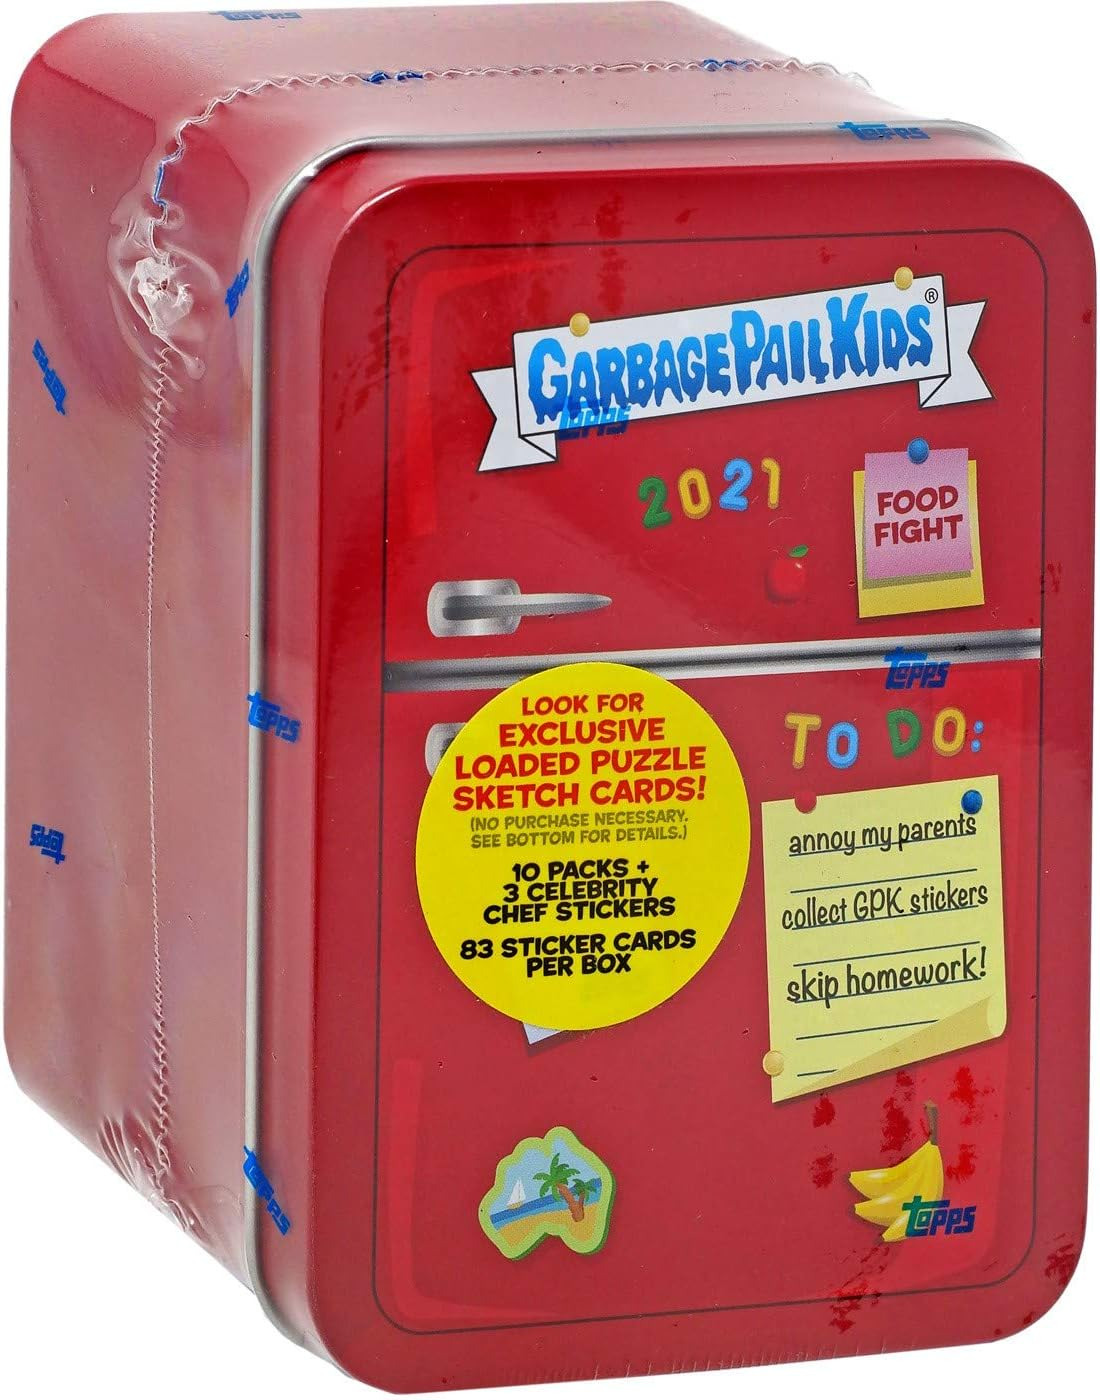 2021 Garbage Pail Kids Food Fight Red Tin - Exclusive Stickers & Rare Cards